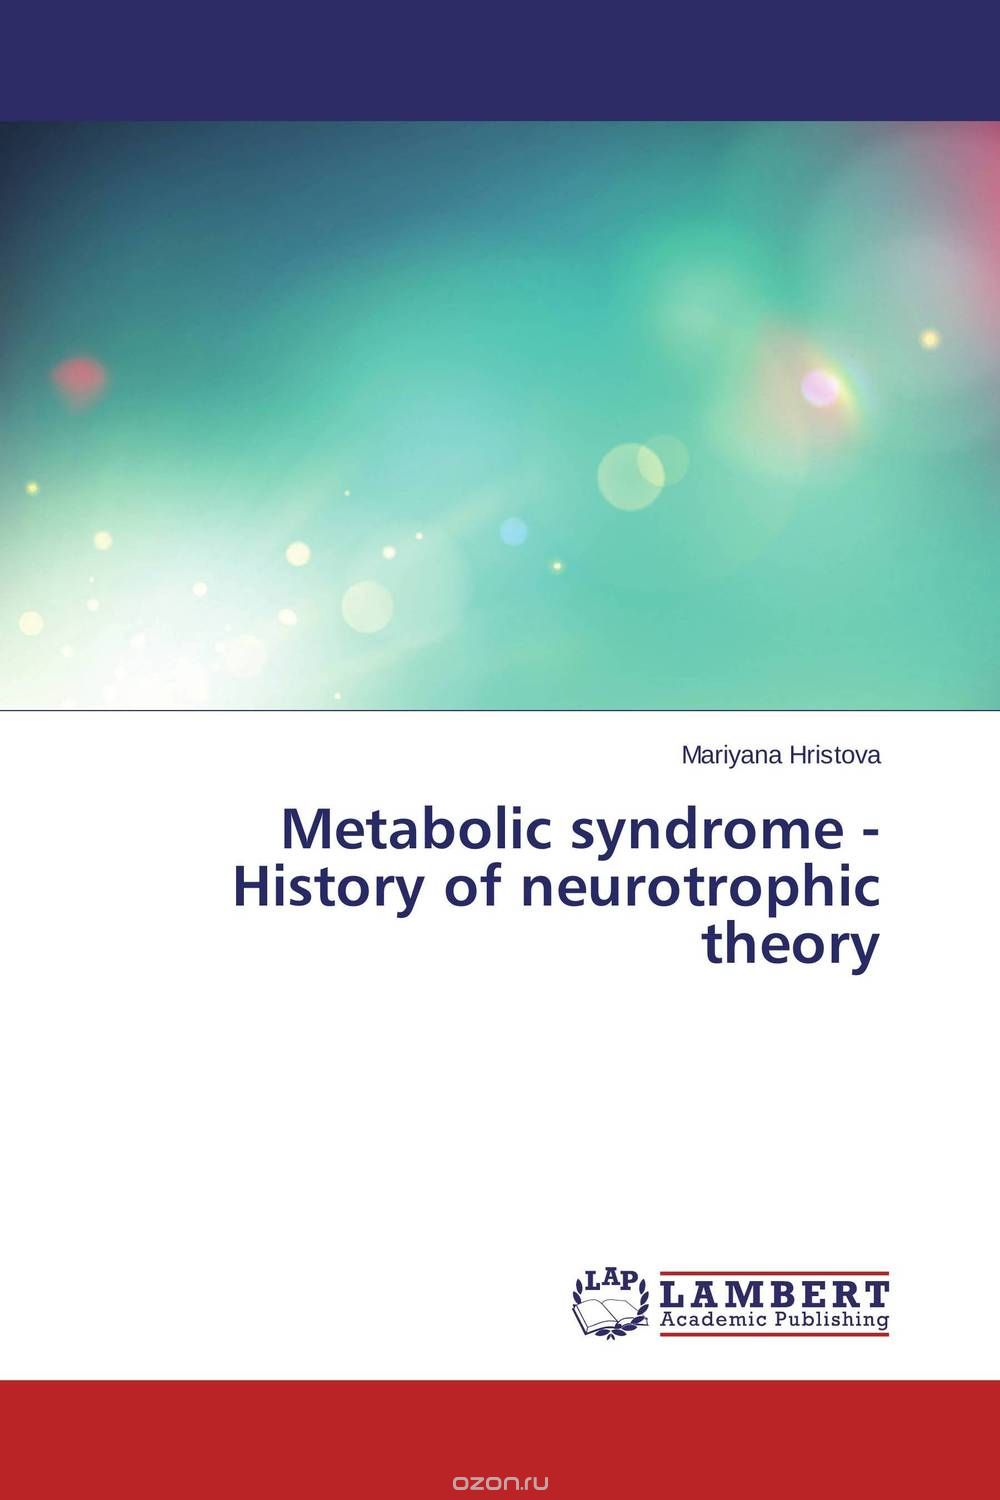 Metabolic syndrome - History of neurotrophic theory